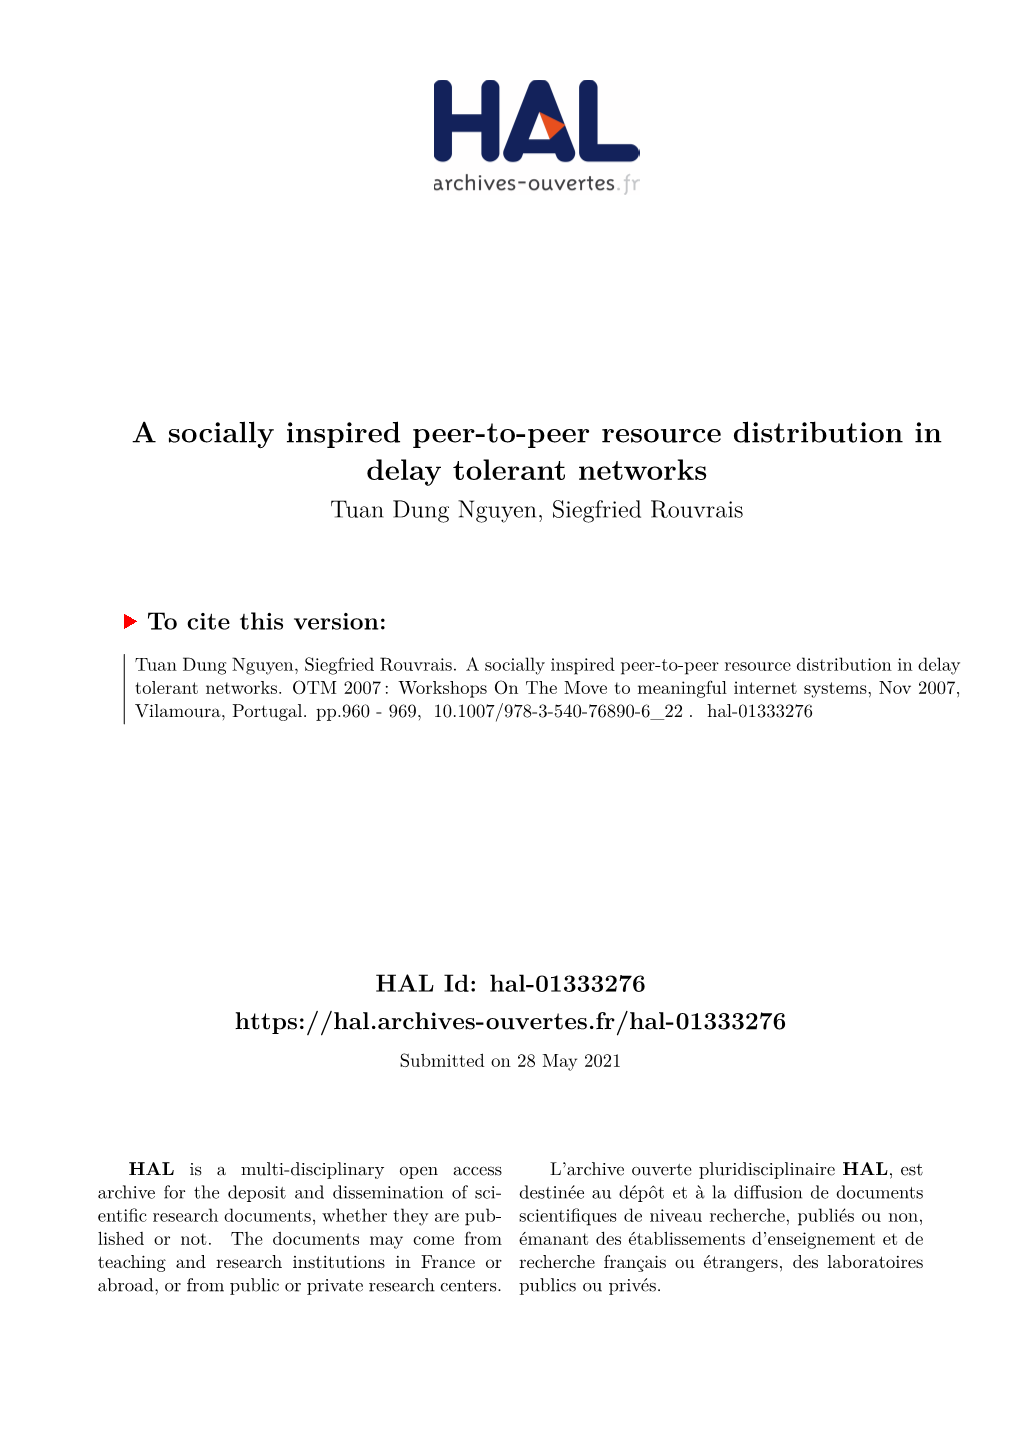 A Socially Inspired Peer-To-Peer Resource Distribution in Delay Tolerant Networks Tuan Dung Nguyen, Siegfried Rouvrais